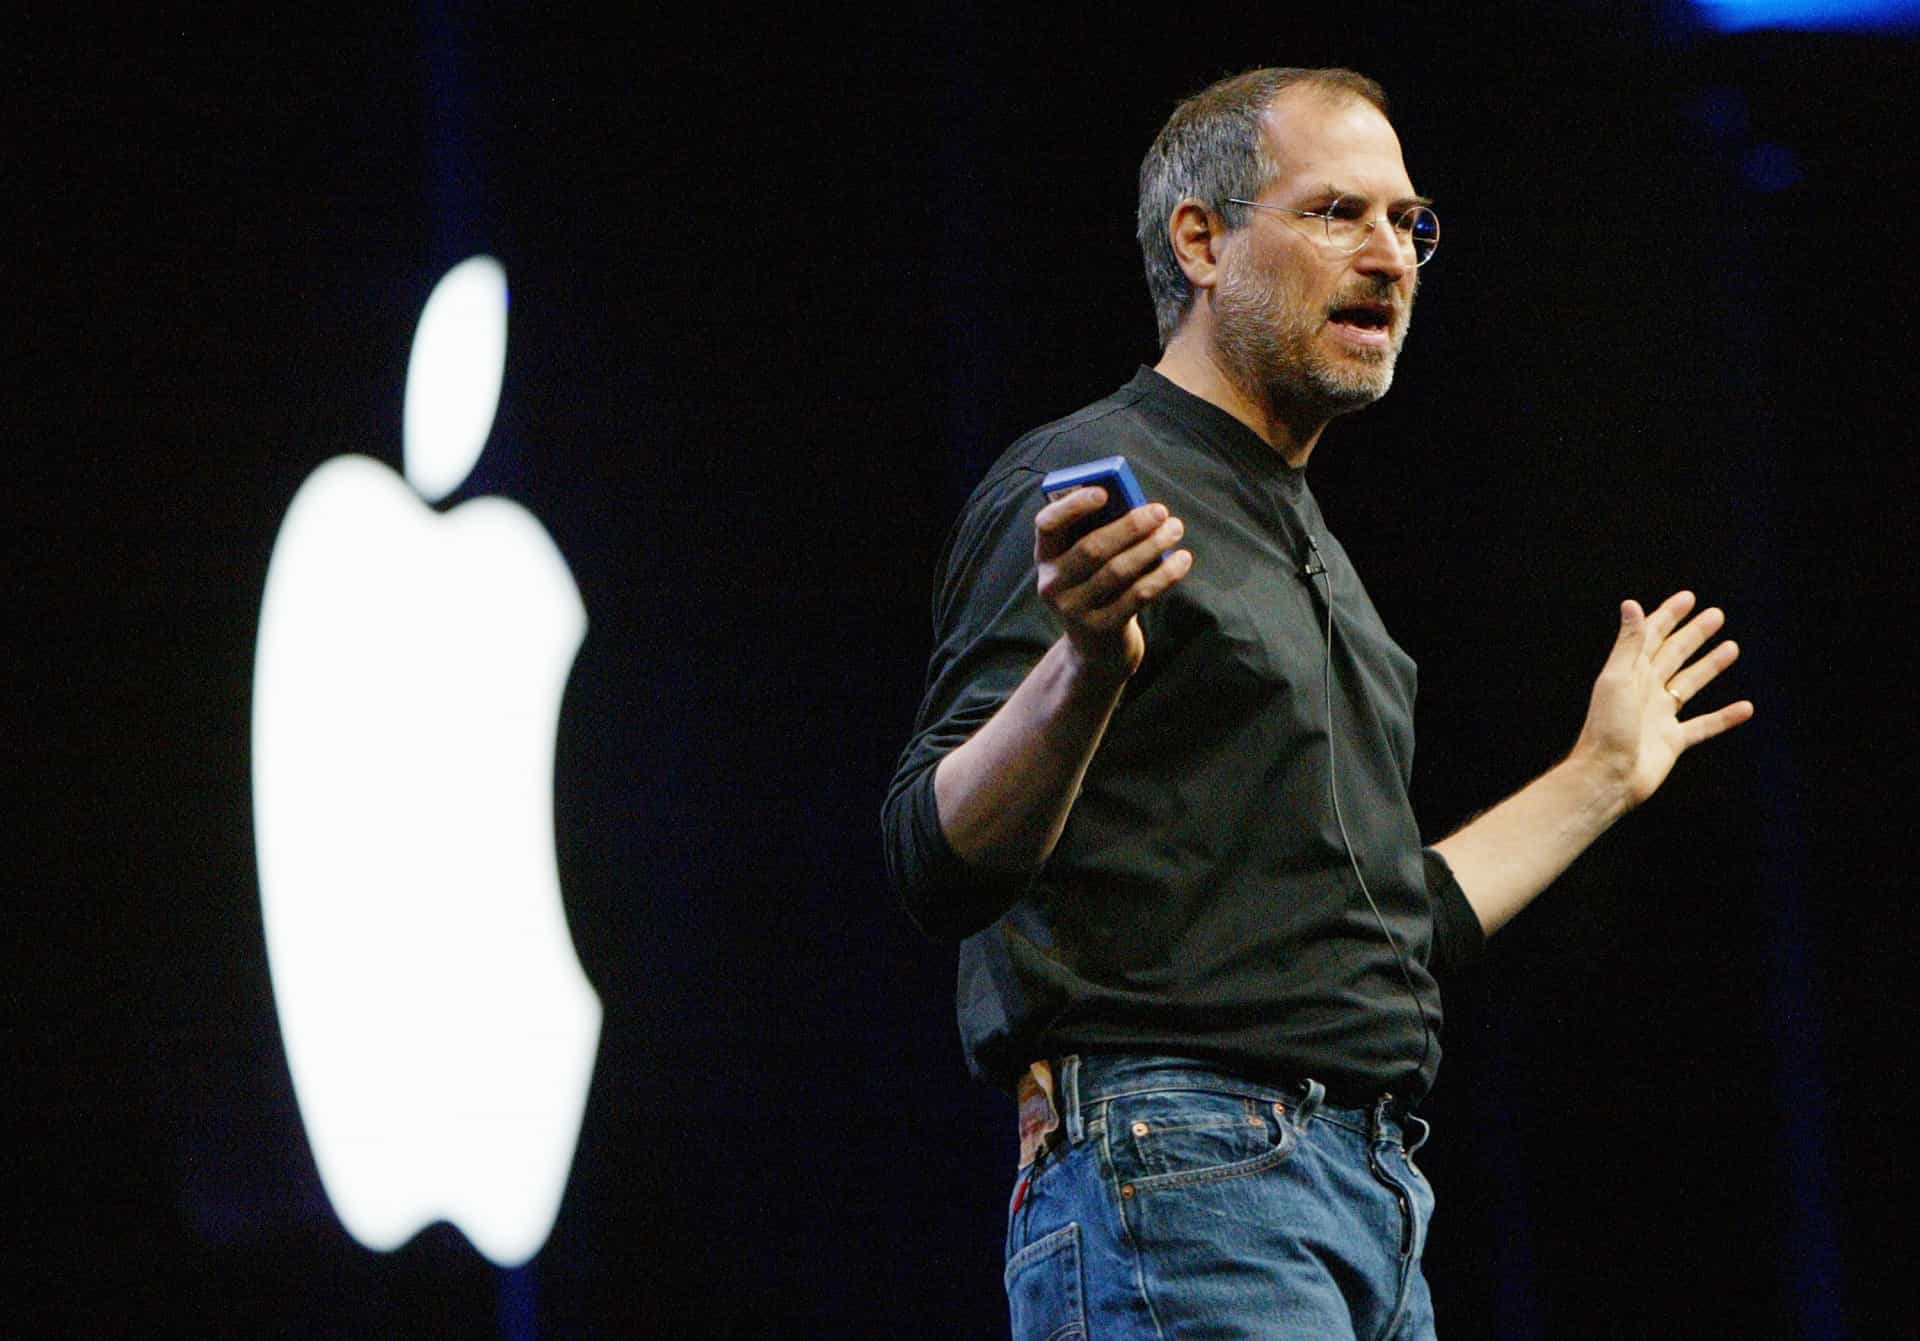 Steve Jobs's self-titled biographic <a href="https://uk.starsinsider.com/travel/219783/visit-these-destinations-from-history-books" rel="noopener">book</a> by author Walter Isaacson was actually authorized.